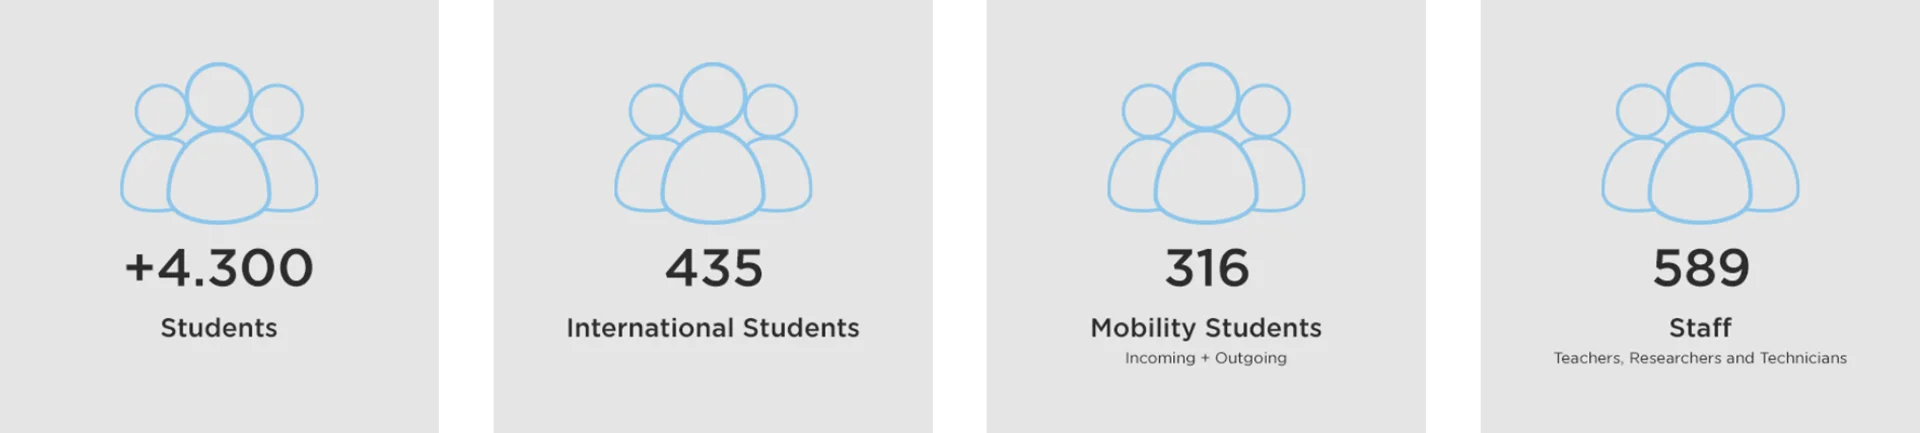 +4.300 Students
435 International Students
316 Mobility Students (Incoming + Outgoing)
589 Employees (Teachers, Researchers and Technicians)